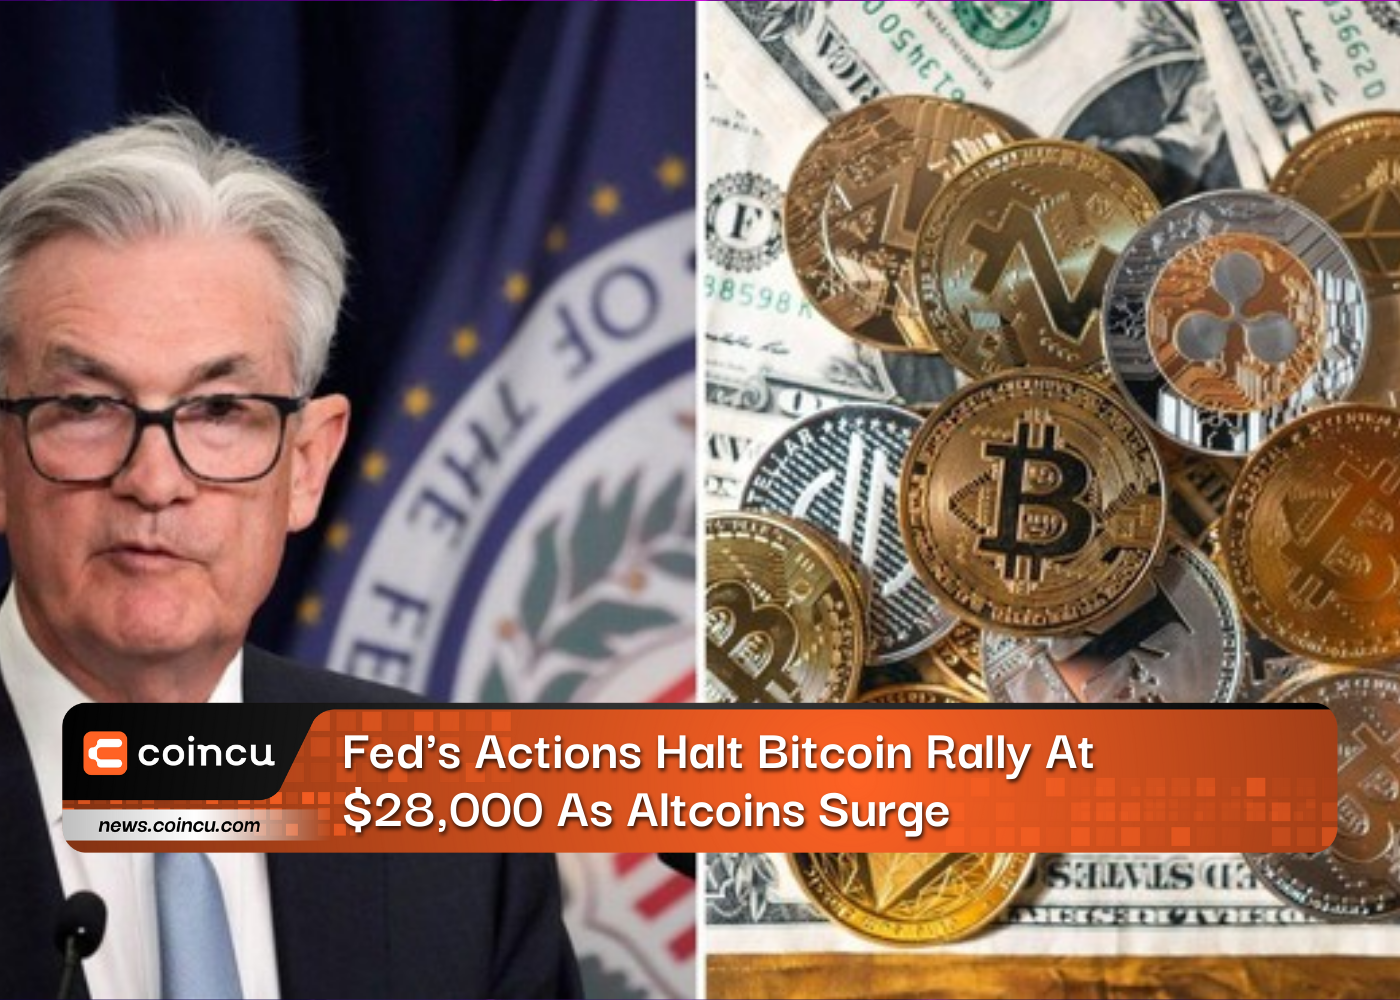 Fed's Actions Halt Bitcoin Rally At $28,000 As Altcoins Surge